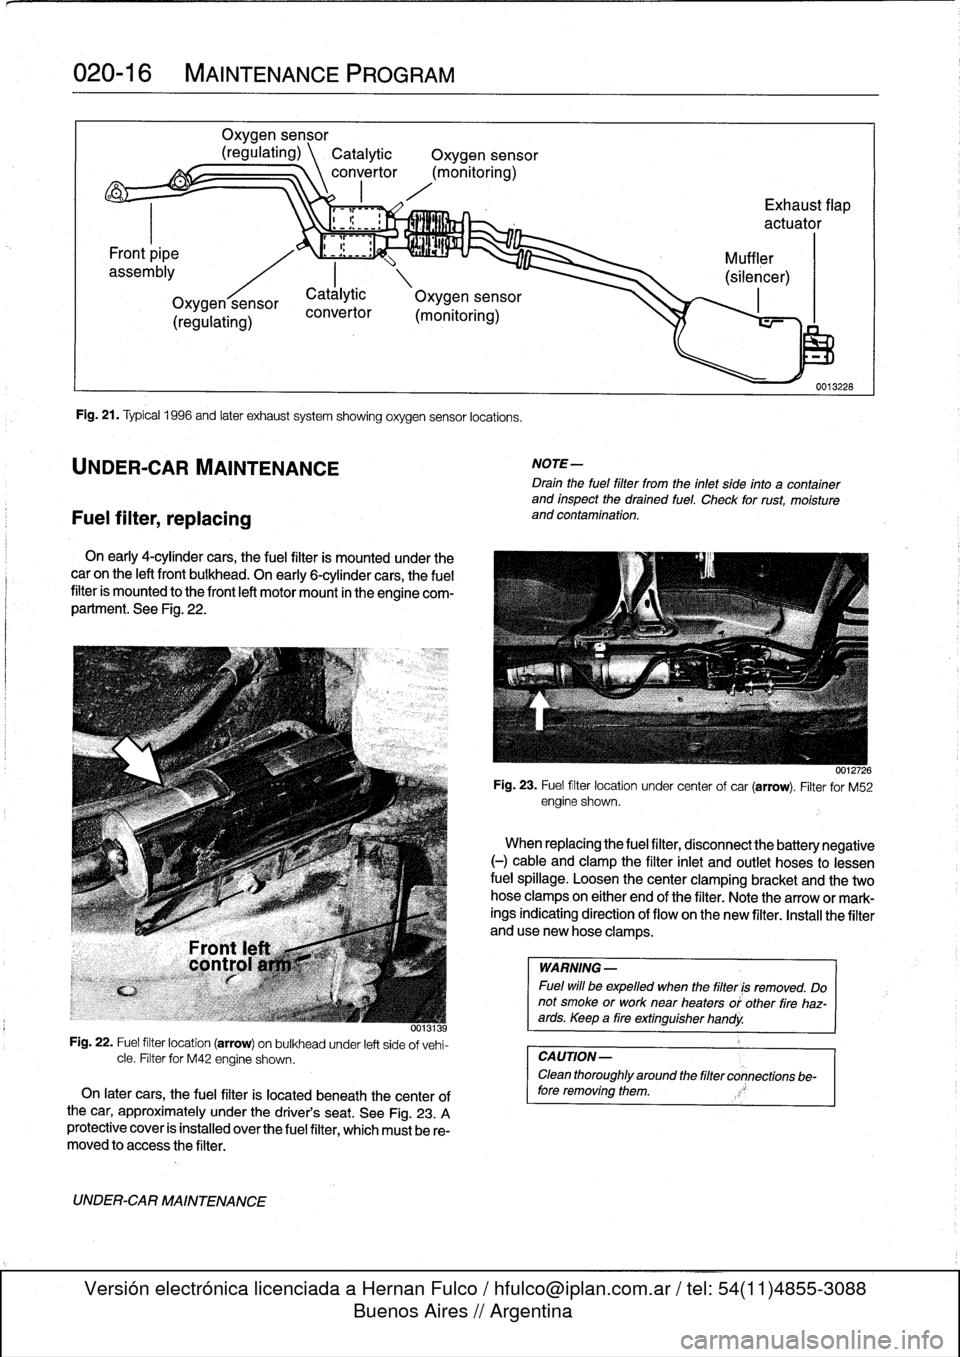 BMW 318i 1997 E36 User Guide 
020-
1
6

	

MAINTENANCE
PROGRAM

Fuel
filter,
replacing

Oxygen
sensor

(regulating)
\
Catalytic

	

Oxygen
sensor
convertor
(monitoring)

Fig
.
21
.
Typical
1996
and
later
exhaust
system
showing
ox